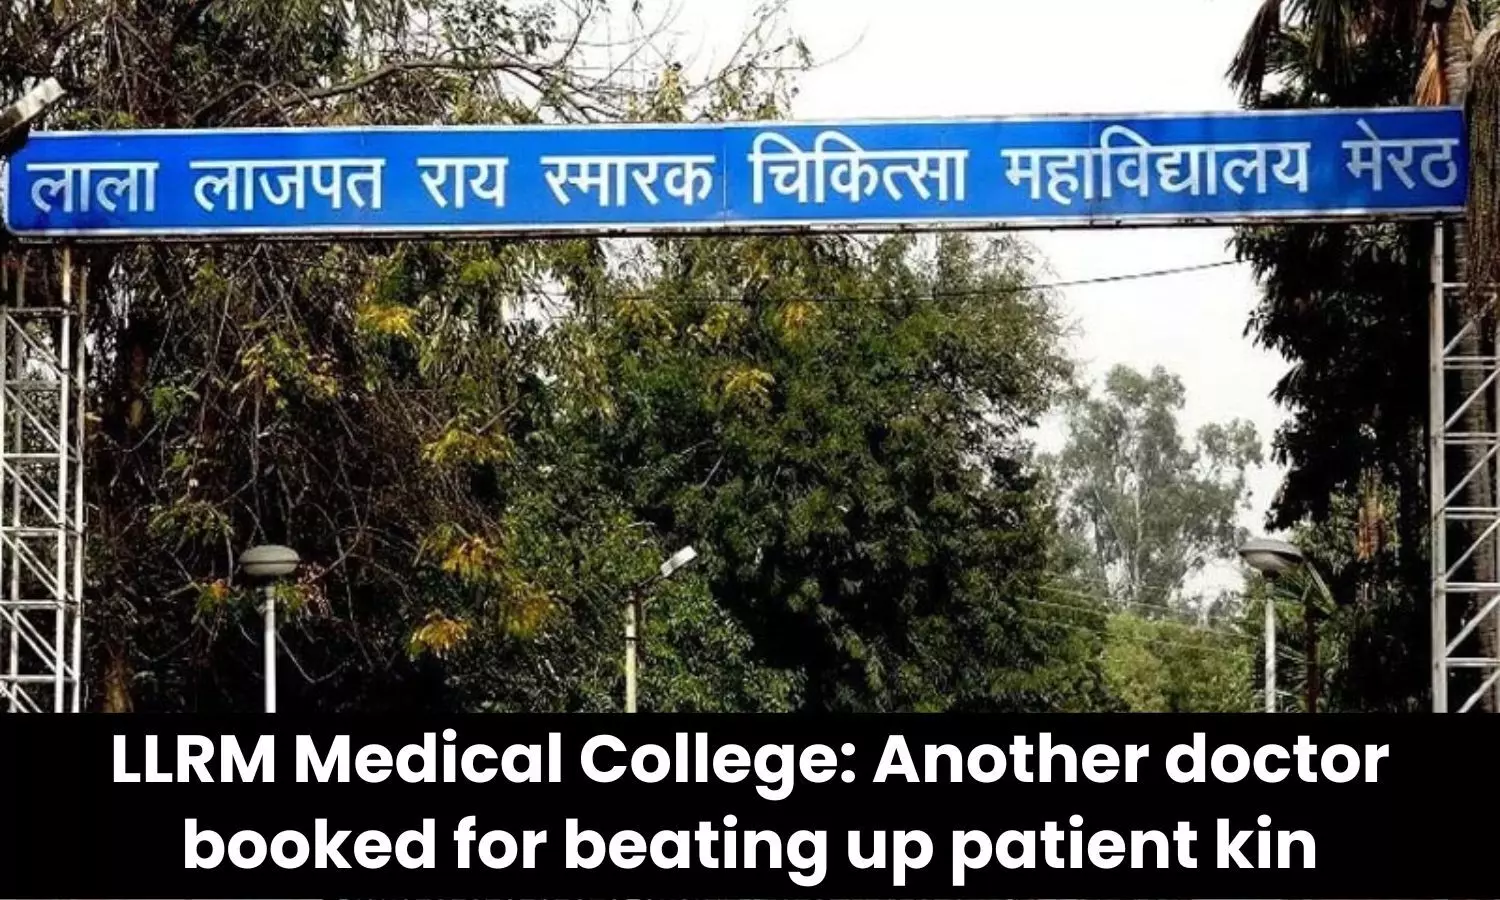 Assualt against relatives of minor patient: Another doctor booked after suspension of 3 doctors